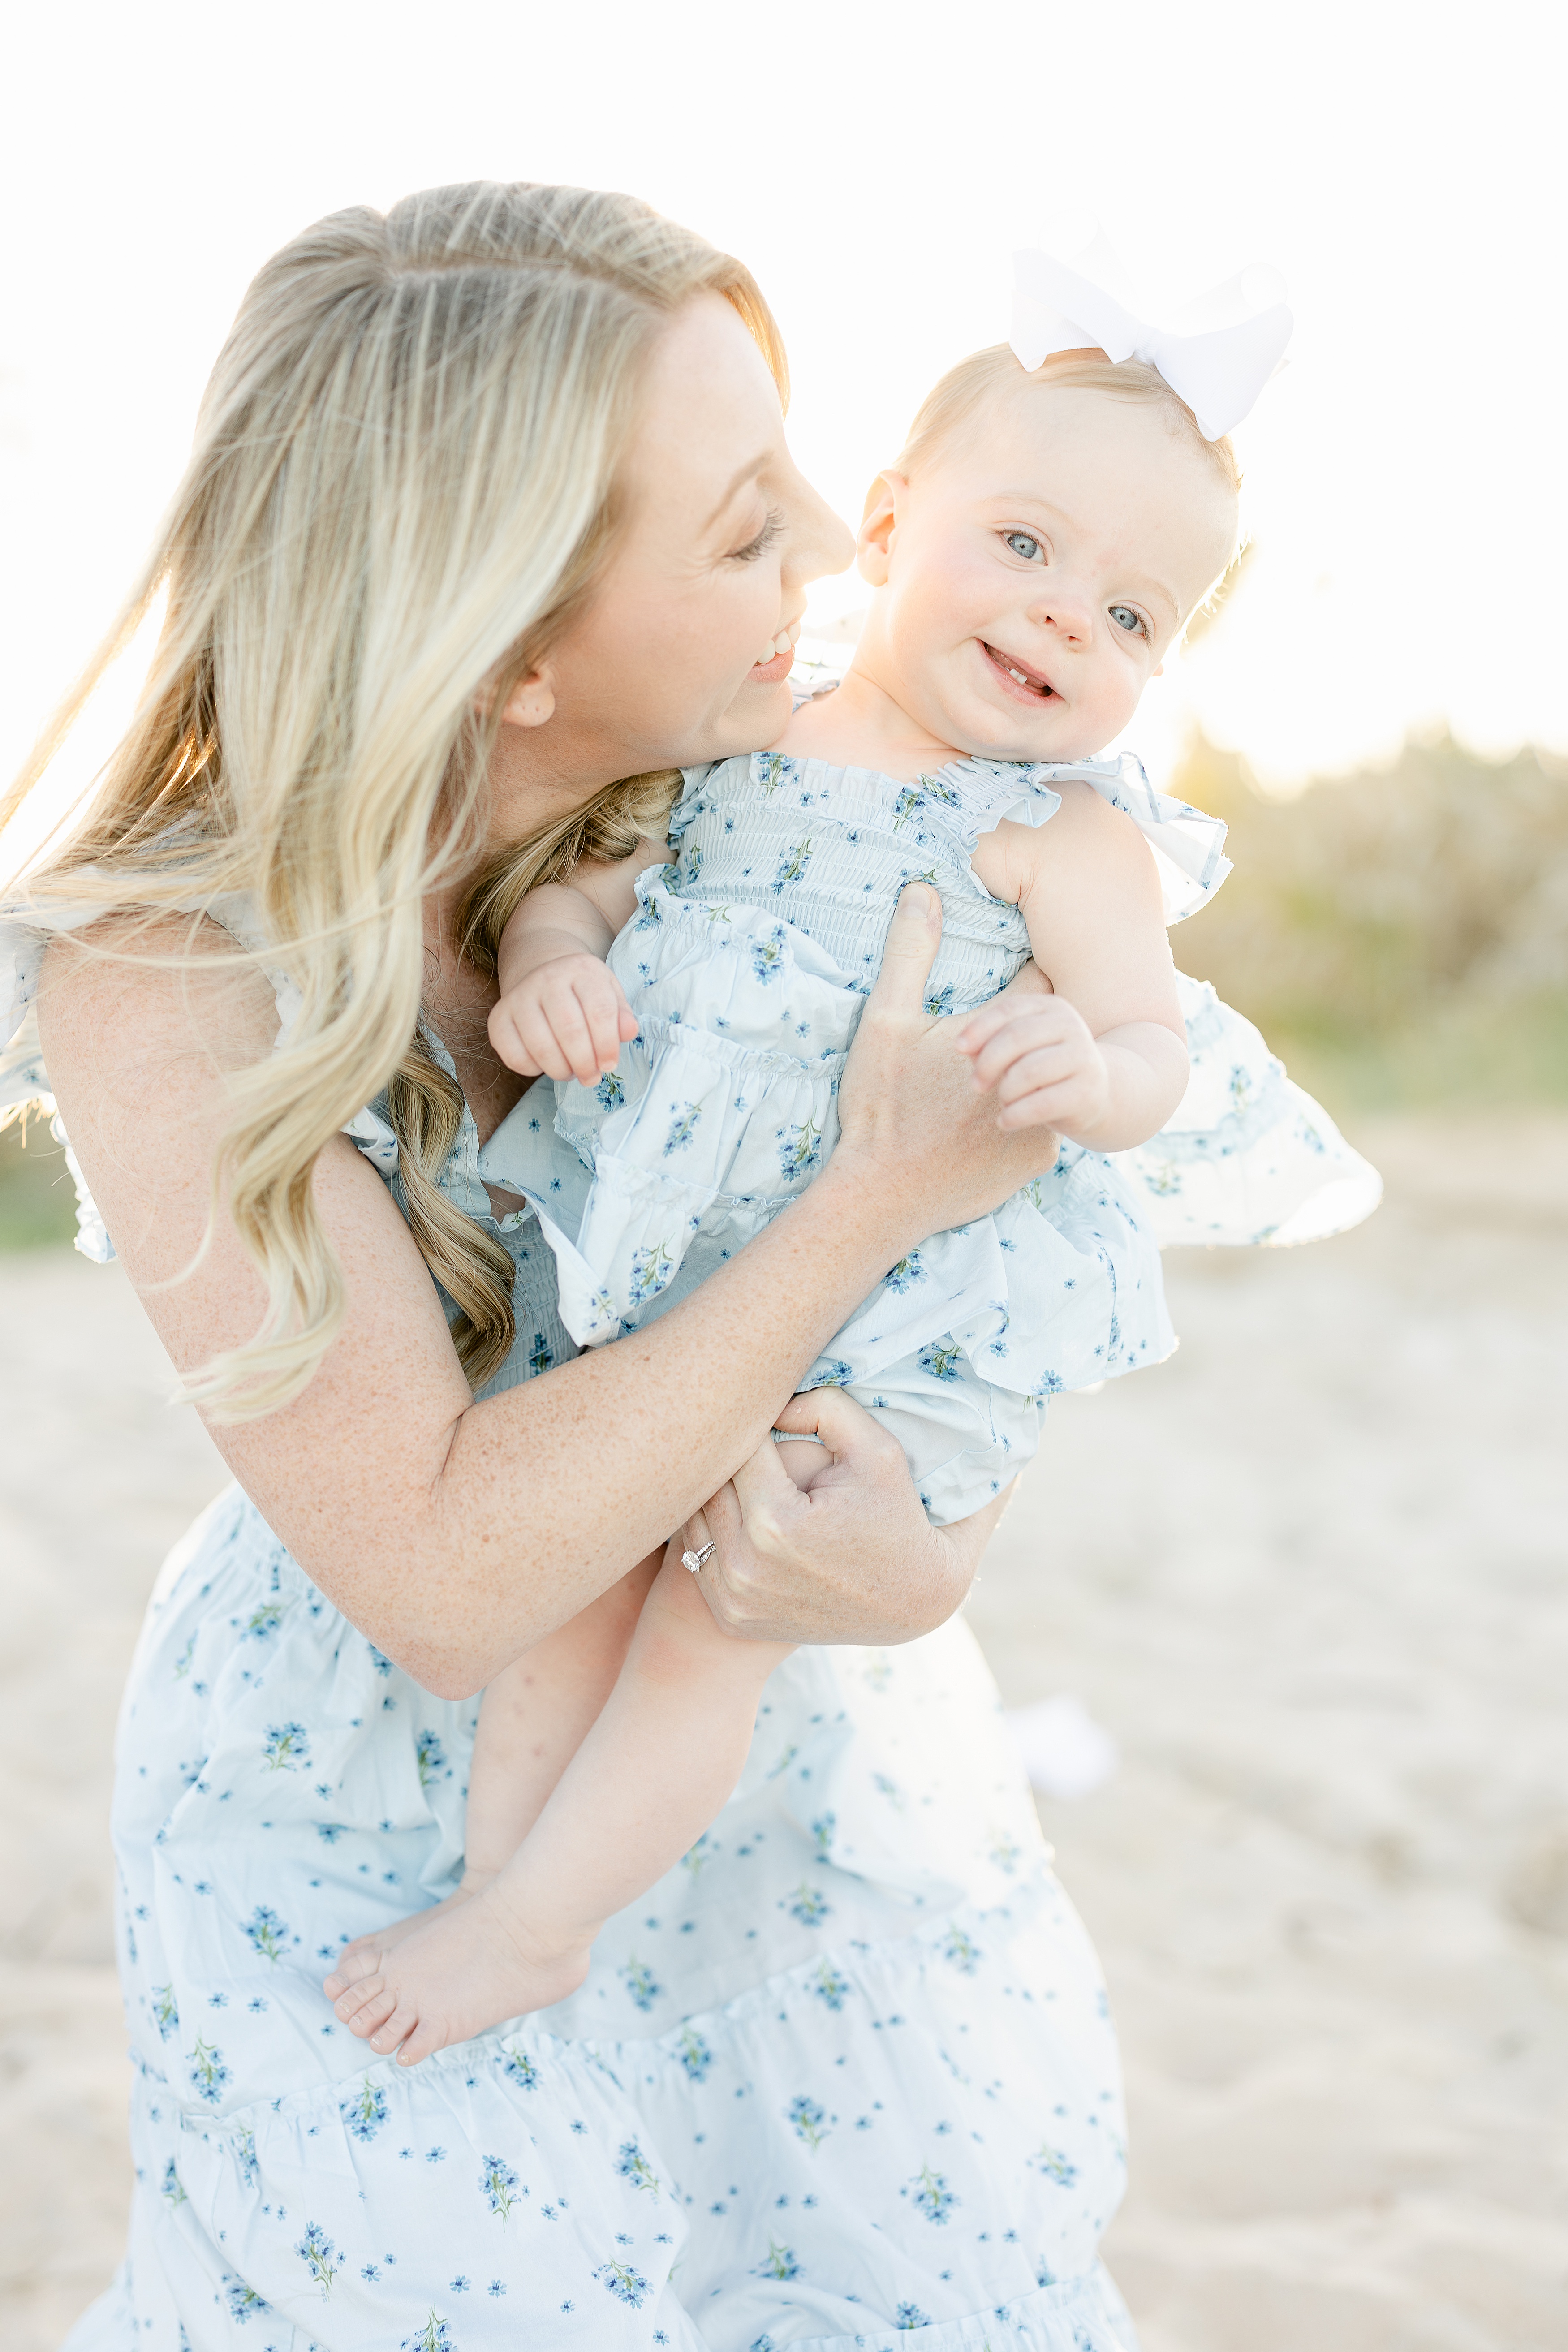 blonde woman in blue and white floral dress holding baby girl on the beach at sunset